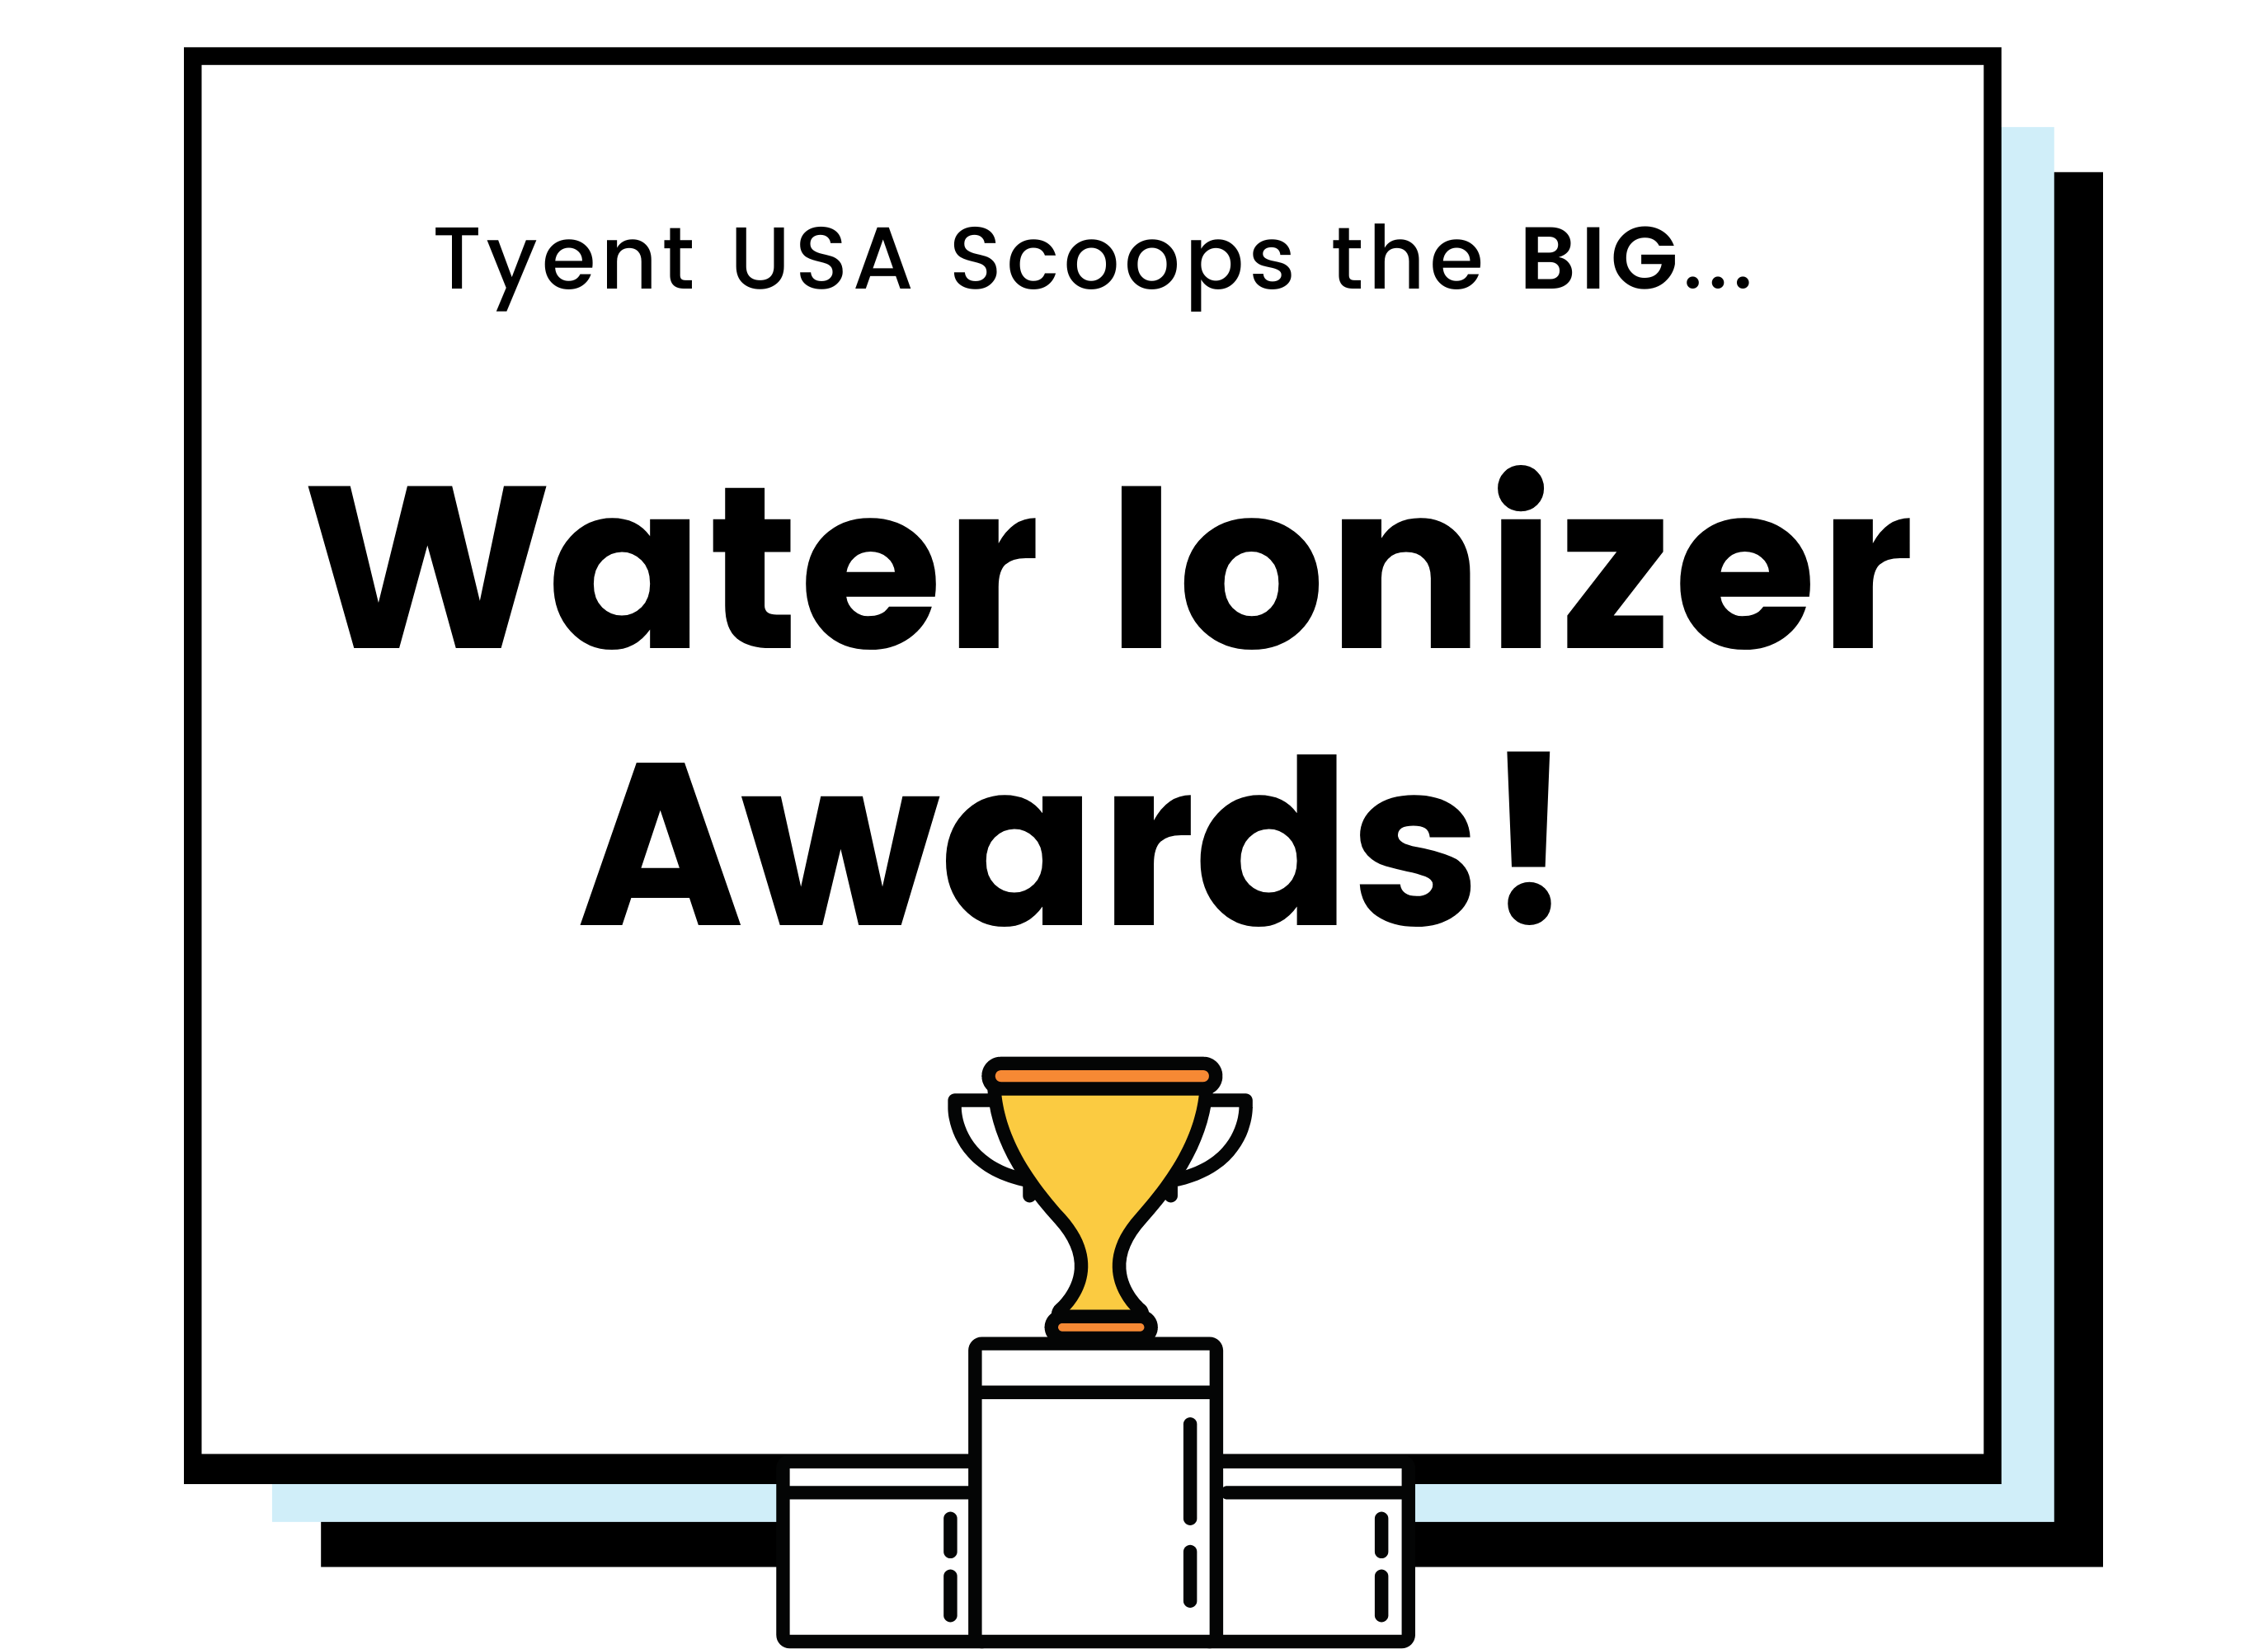 Tyent Scoops the Big Water Ionizer Awards!